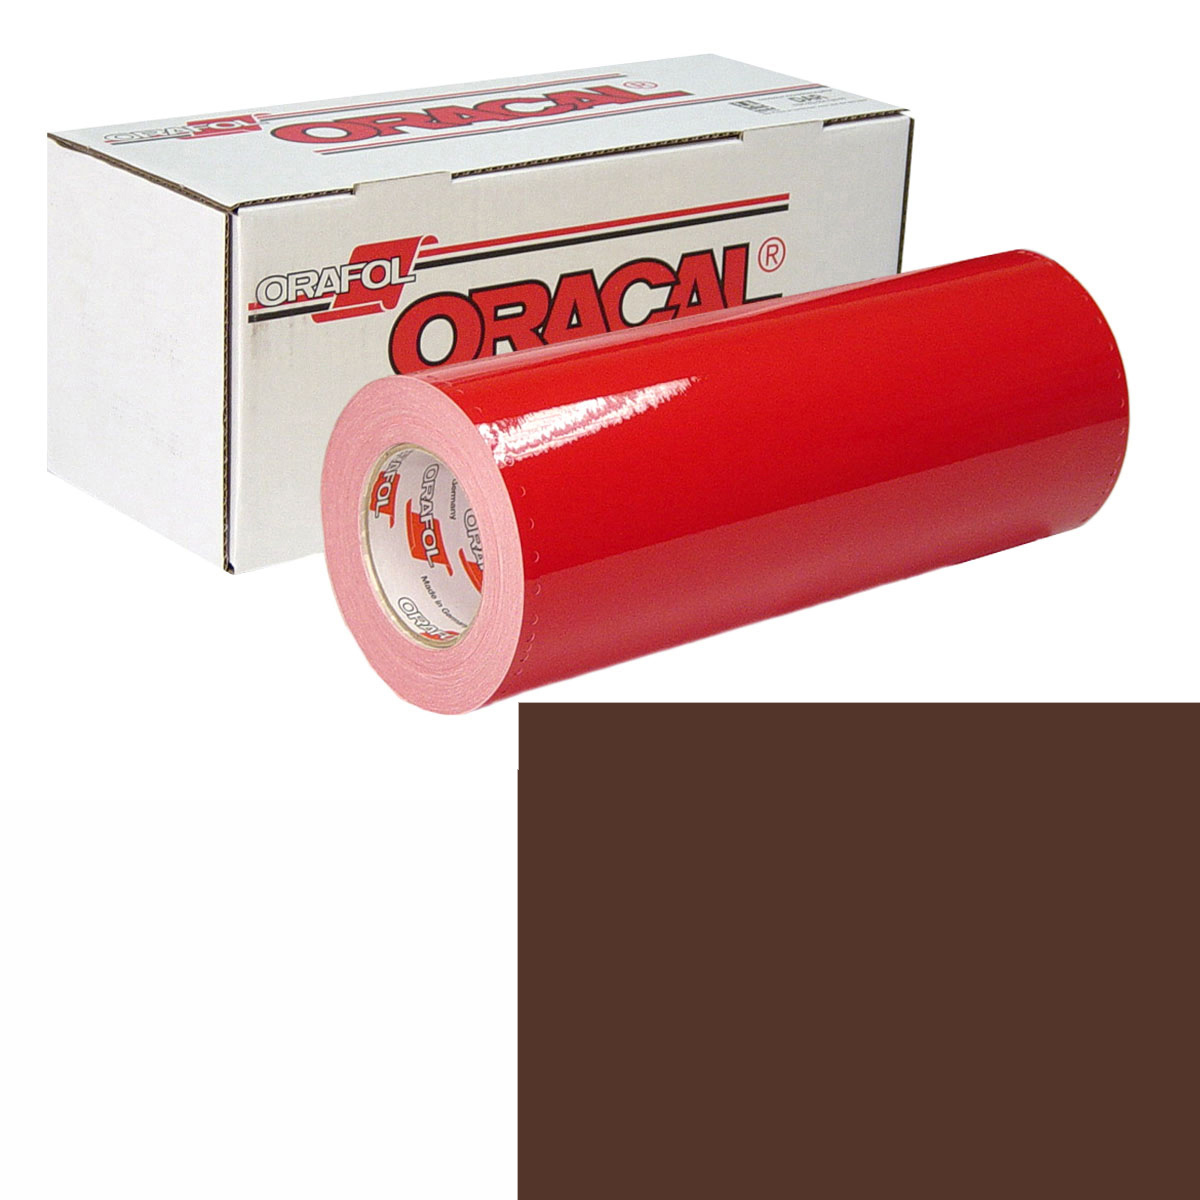 ORACAL 951 Unp 48in X 10yd 810 Cocoa Brown